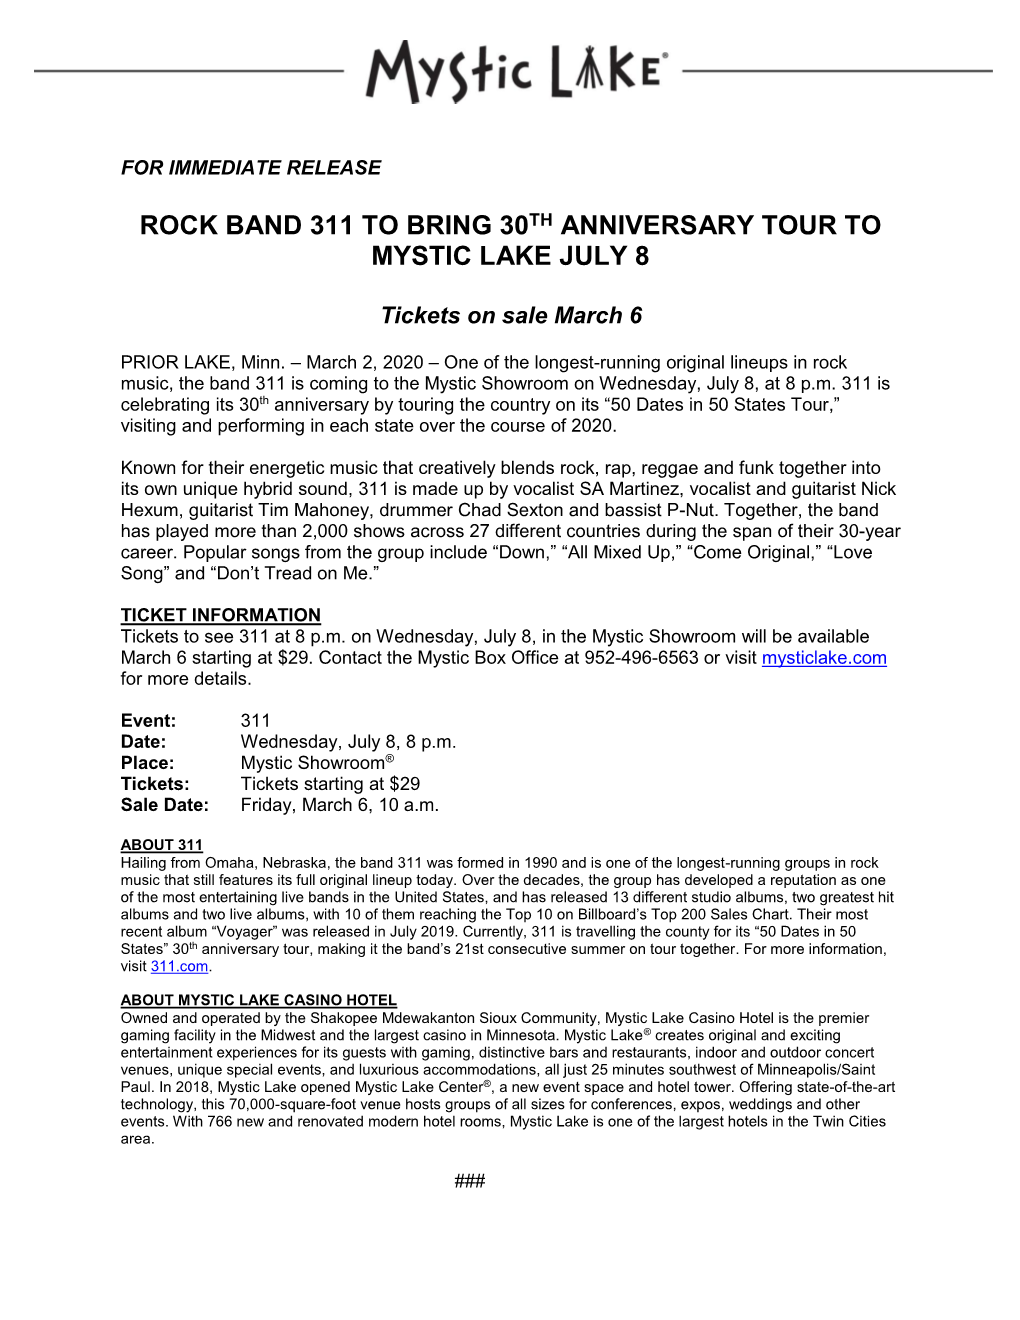 Rock Band 311 to Bring 30Th Anniversary Tour to Mystic Lake July 8